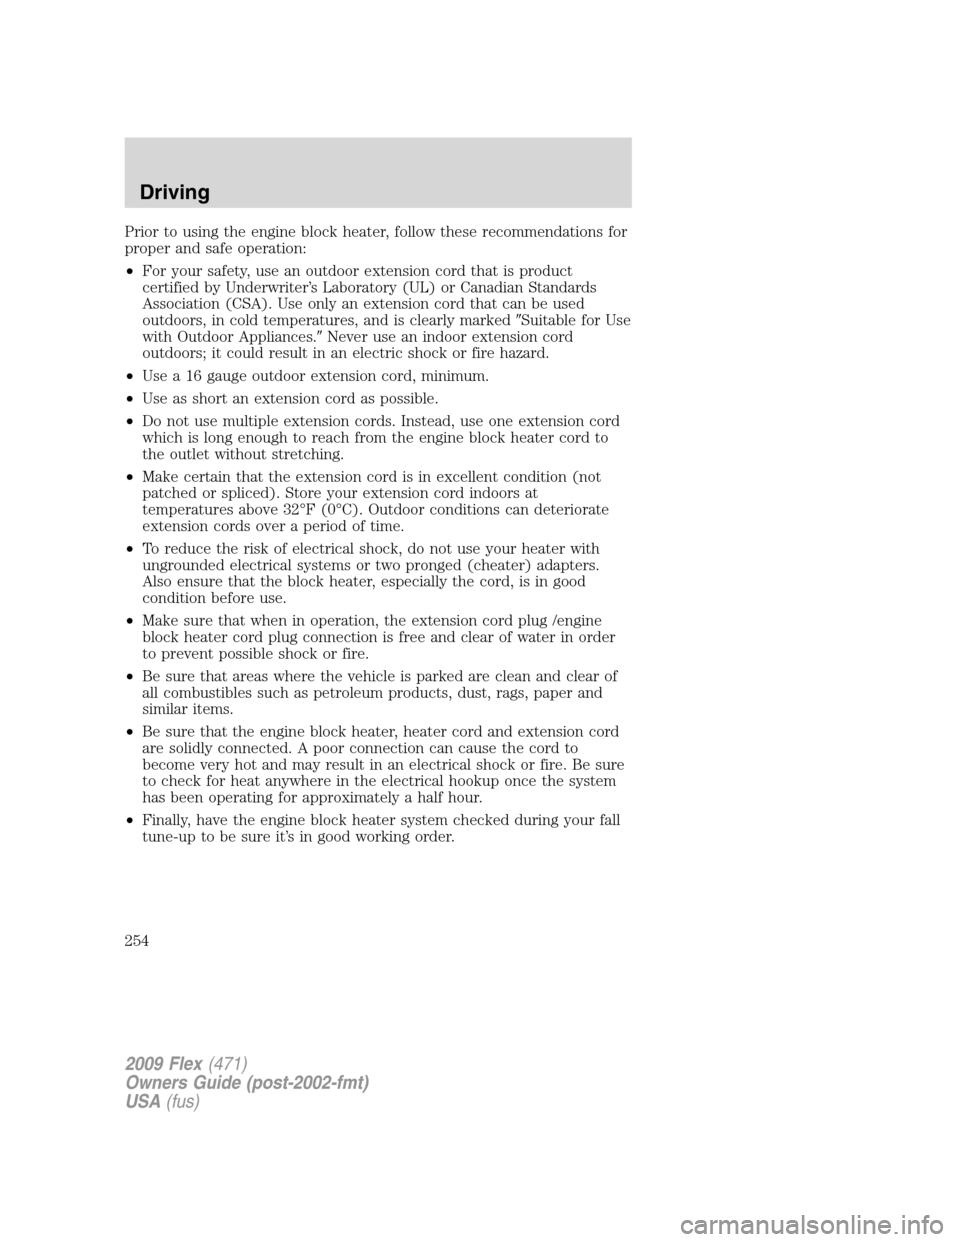 FORD FLEX 2009 1.G Owners Manual Prior to using the engine block heater, follow these recommendations for
proper and safe operation:
•For your safety, use an outdoor extension cord that is product
certified by Underwriter’s Labor